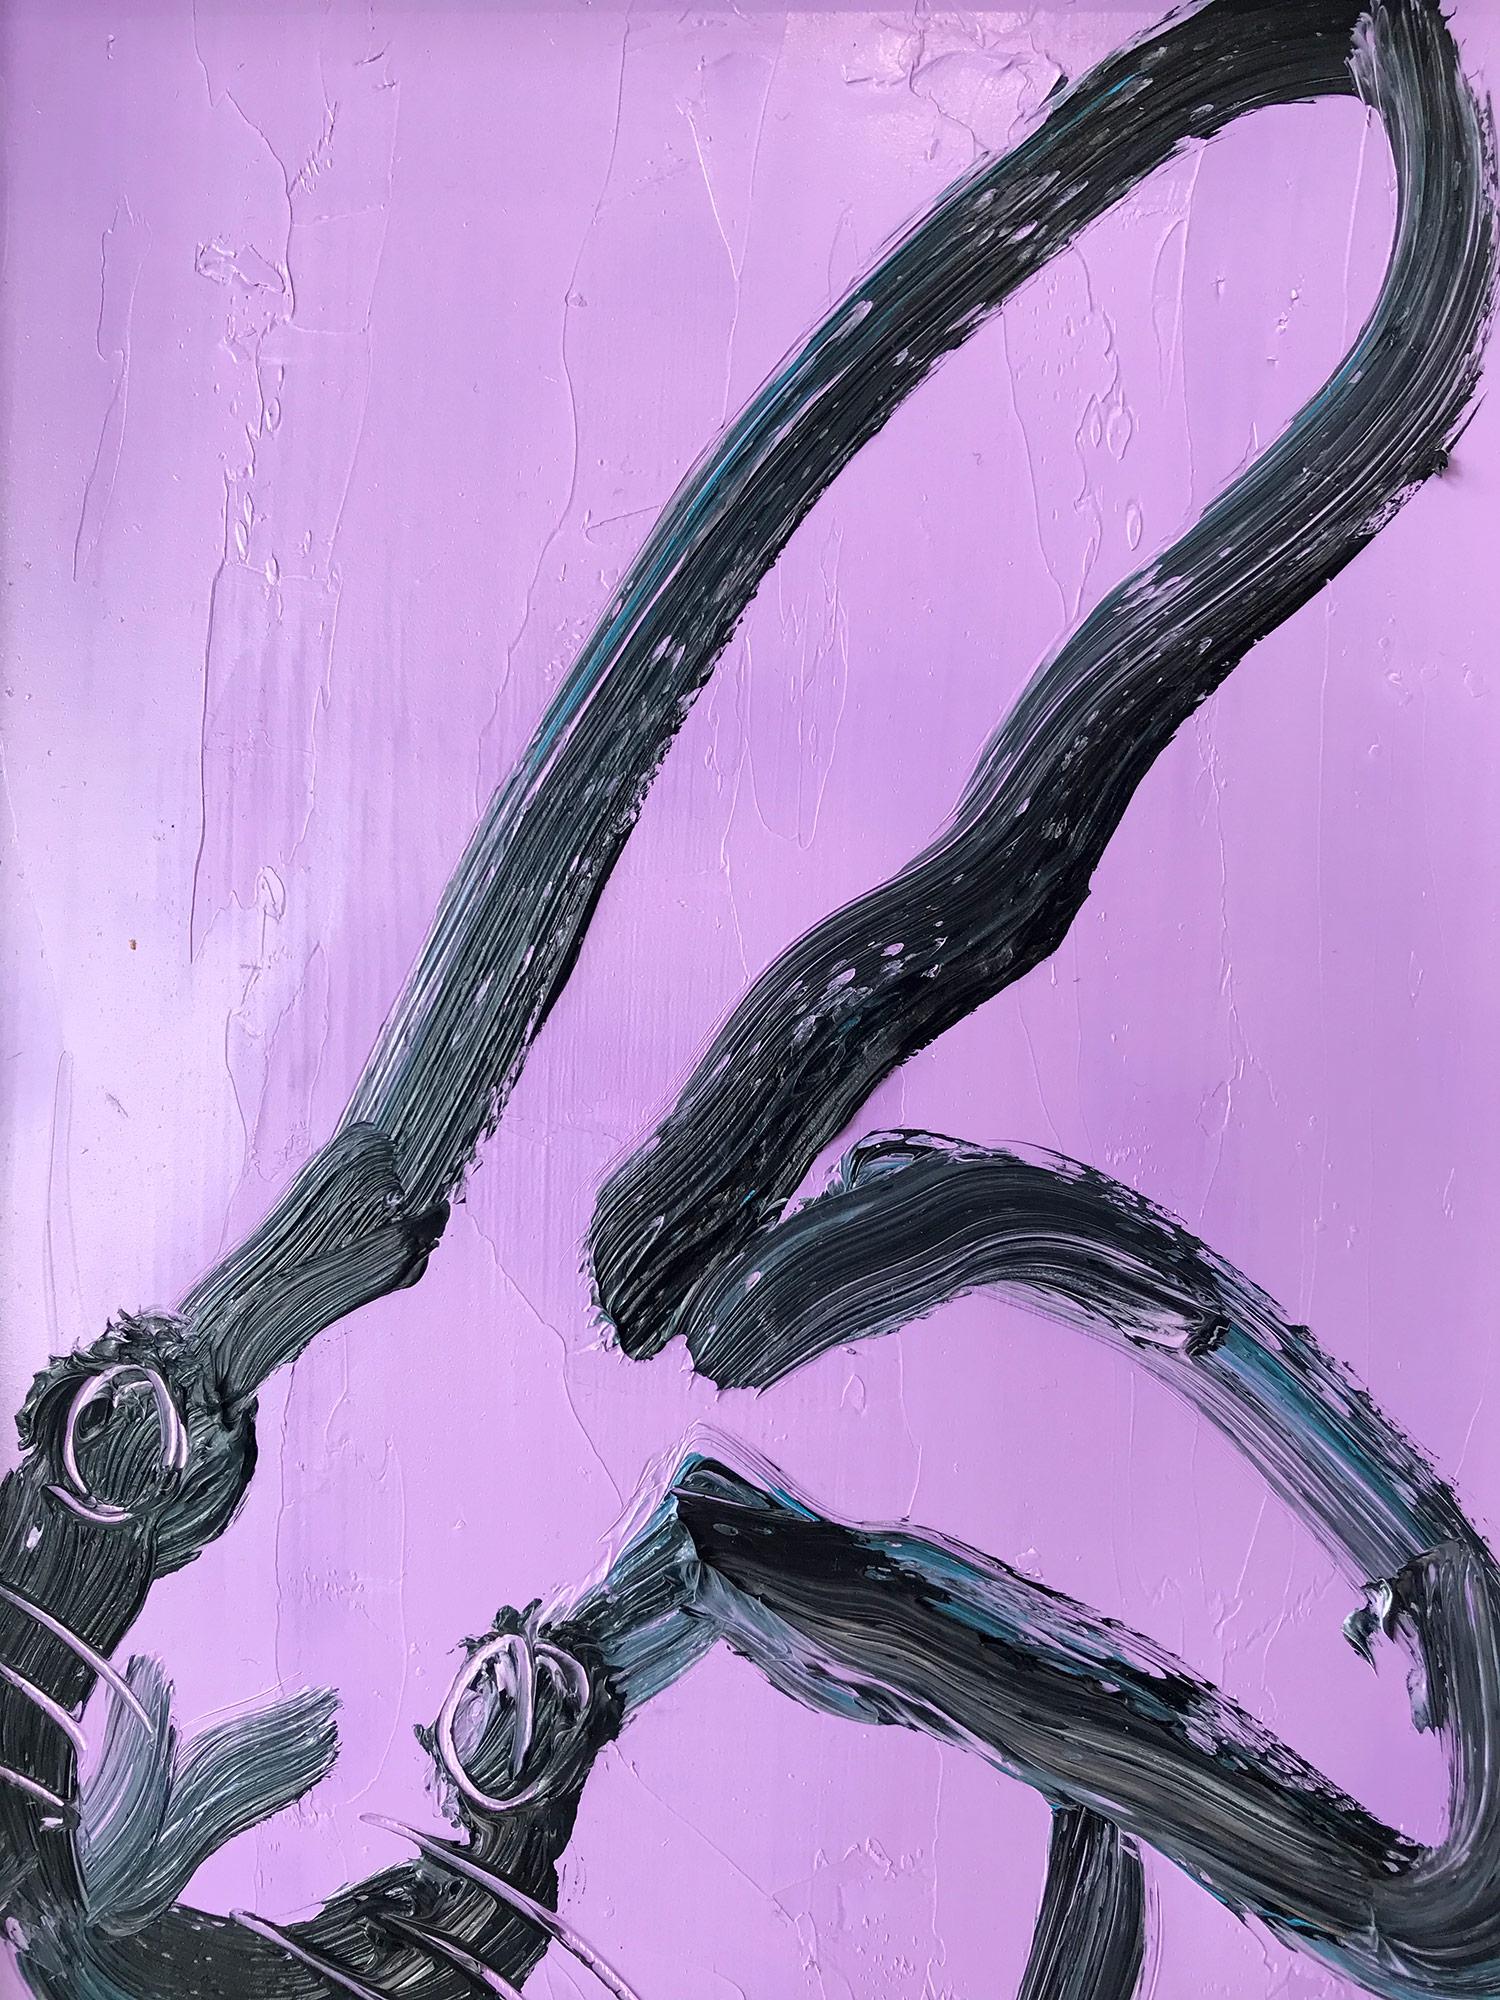 A wonderful composition of one of Slonem's most iconic subjects, Bunnies. This piece depicts a gestural figure of a black bunny on a Purple Lavender background with thick use of paint. It is housed in a wonderful antique frame. Inspired by nature